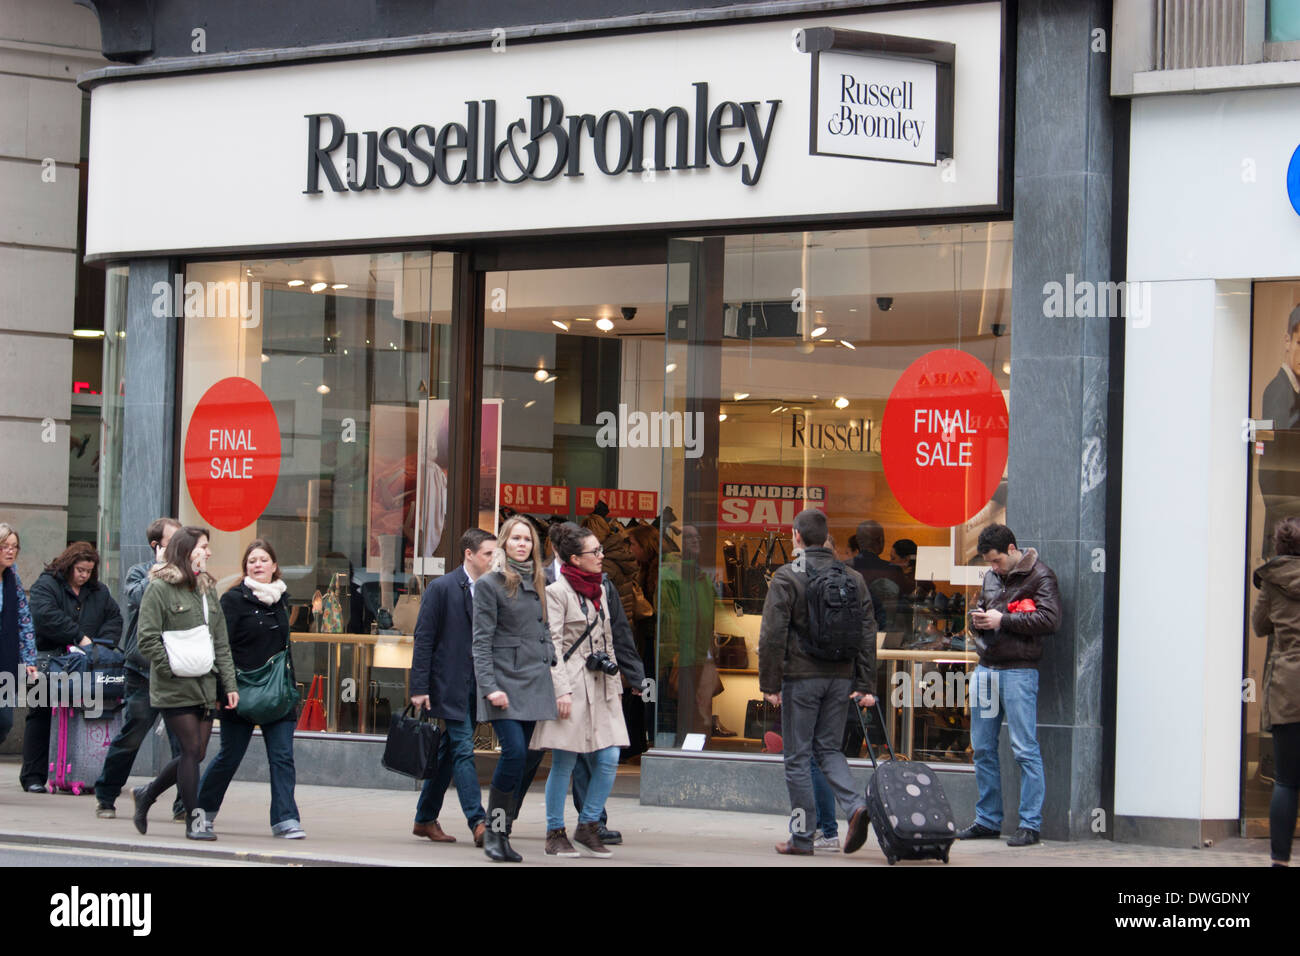 russell bromley shoes london